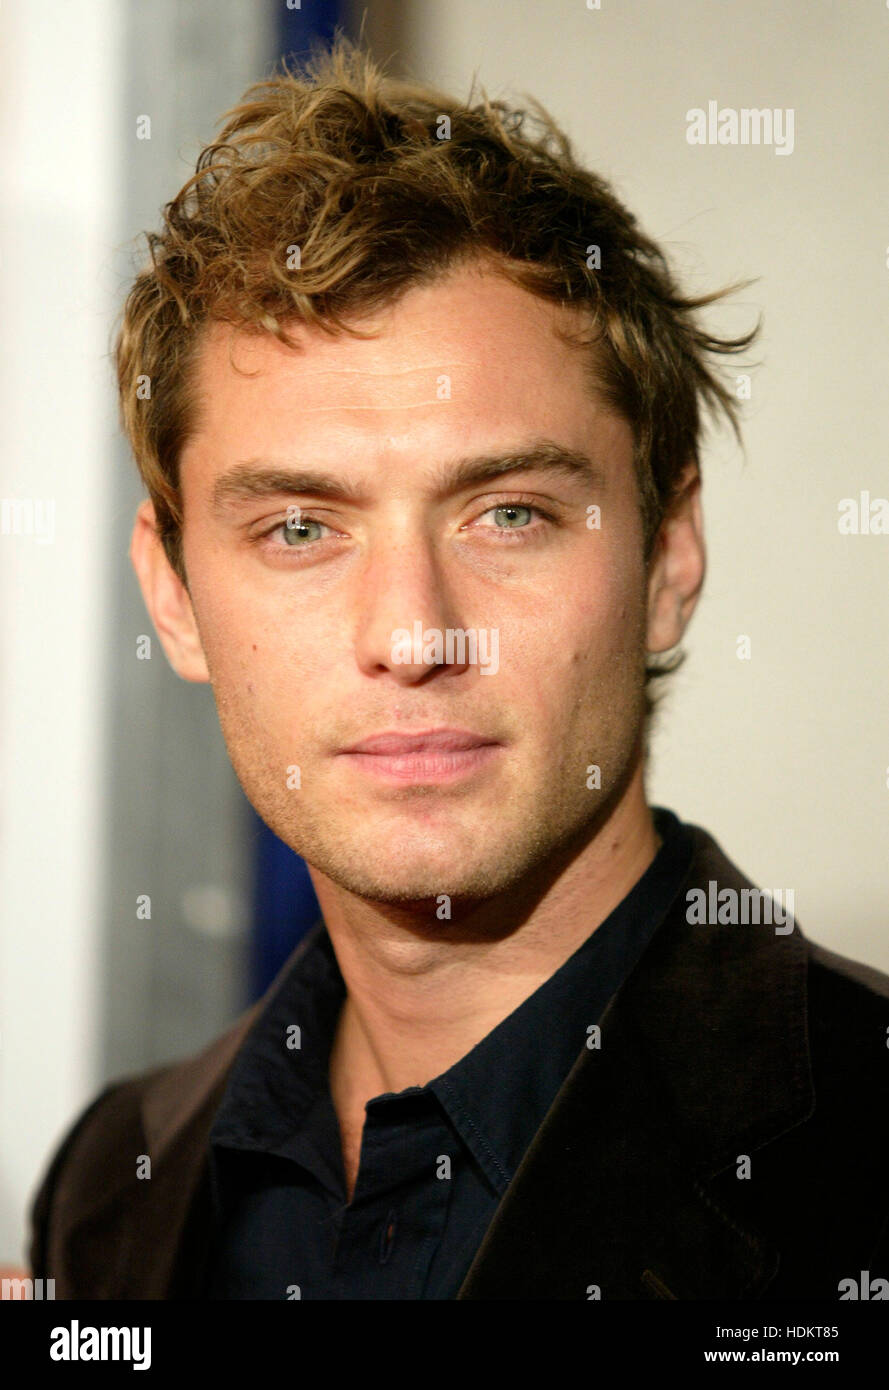 Actor Jude Law arrives at the premiere for the film, 'Closer' at the Mann Village theatre in the Westwood section of Los Angeles, California on Monday 22 November, 2004. Photo credit: Francis Specker Stock Photo